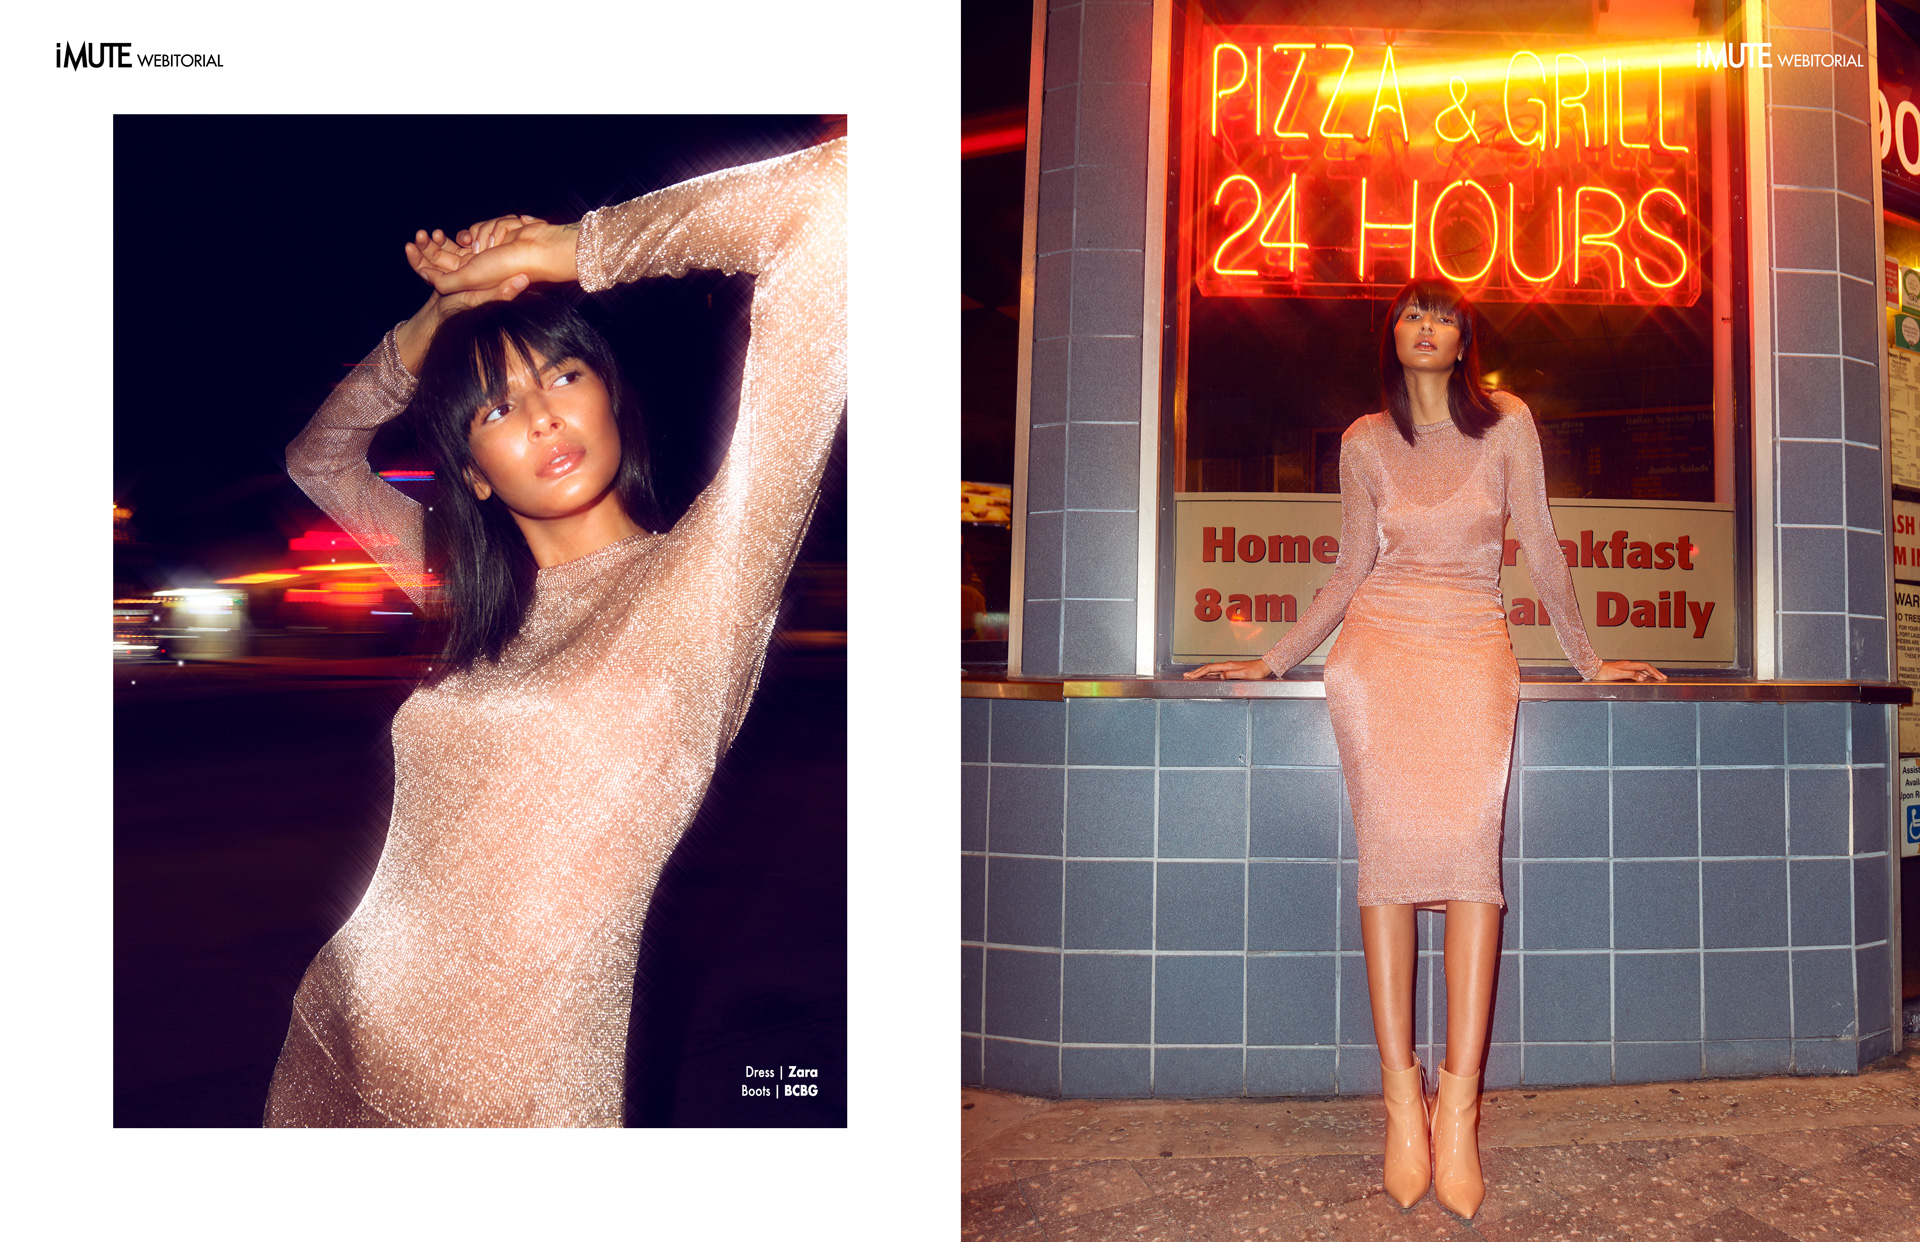 After Hours webitorial for iMute Magazine PHOTOGRAPHER | YELSSING ESPINOZA MODEL | Karen Soto @ Wilhelmina Models STYLIST | ANTHONY BERMUDEZ @ ARTISTS BY TIMOTHY PRIANO MAKEUP & HAIR | Bri Soffa